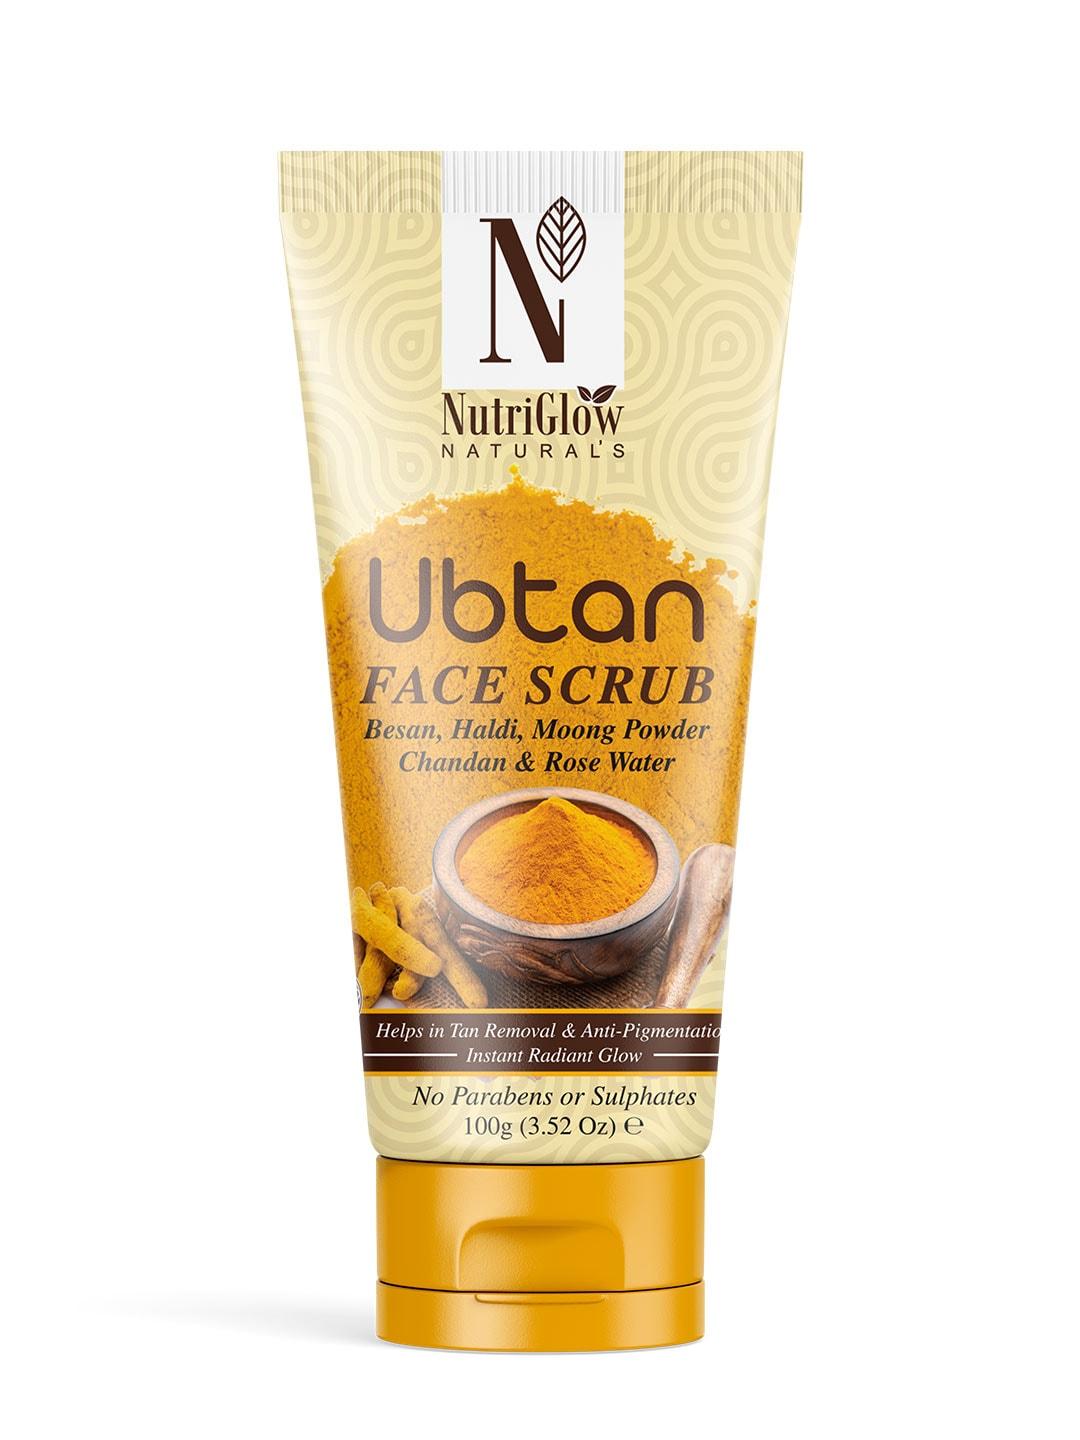 nutriglow naturals set of 2 ubtan face scrub for tan removal - 100g each